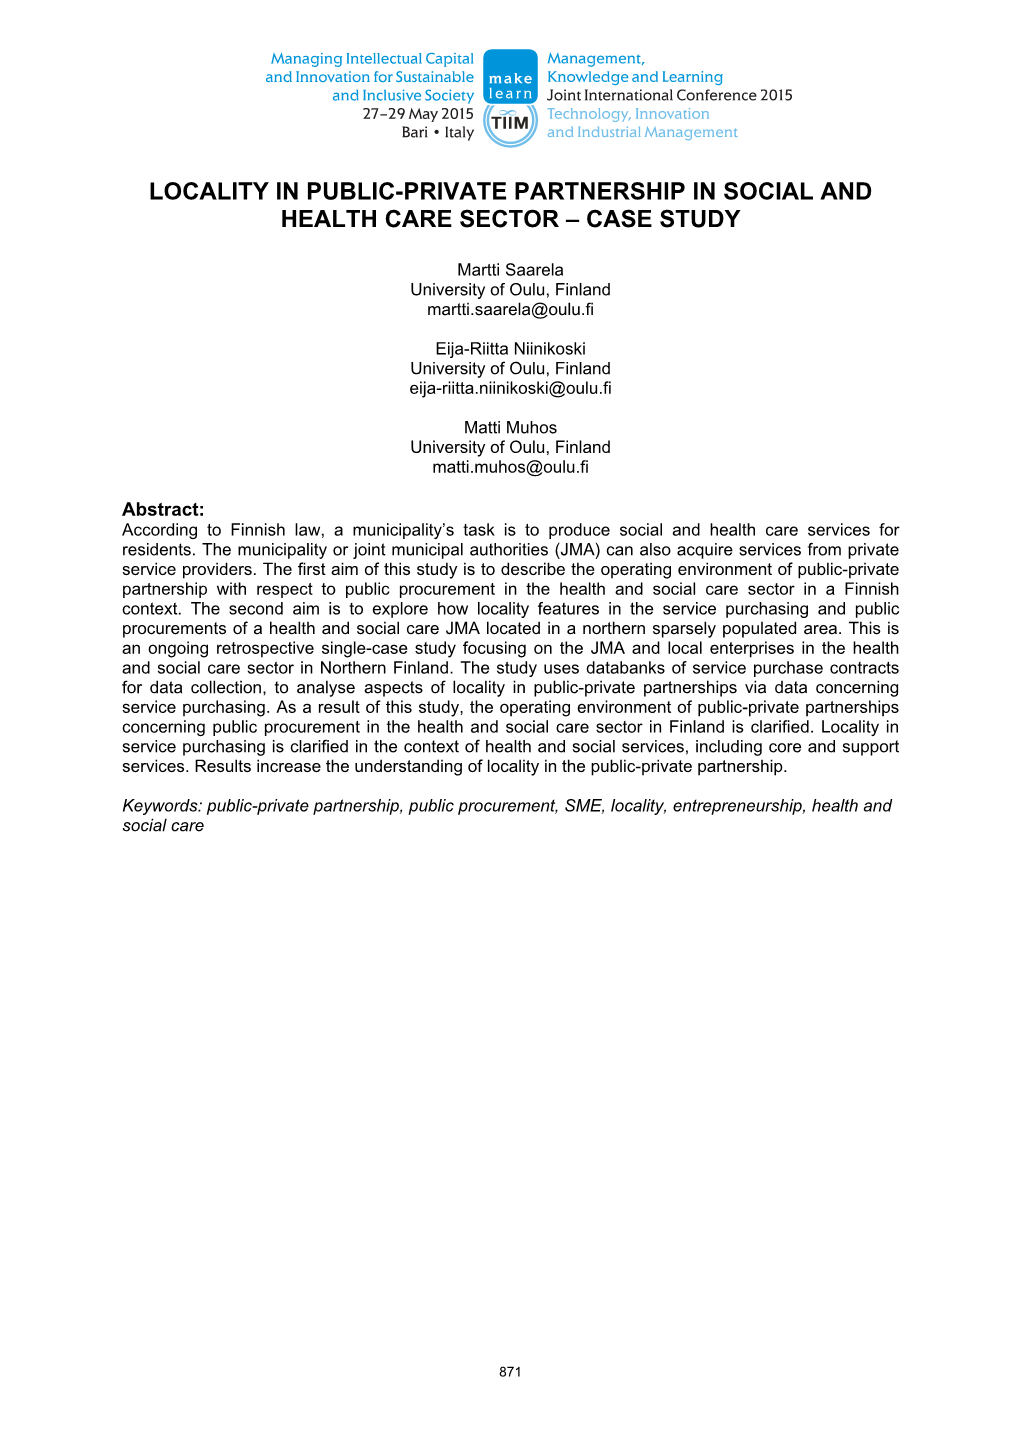 Locality in Public-Private Partnership in Social and Health Care Sector – Case Study